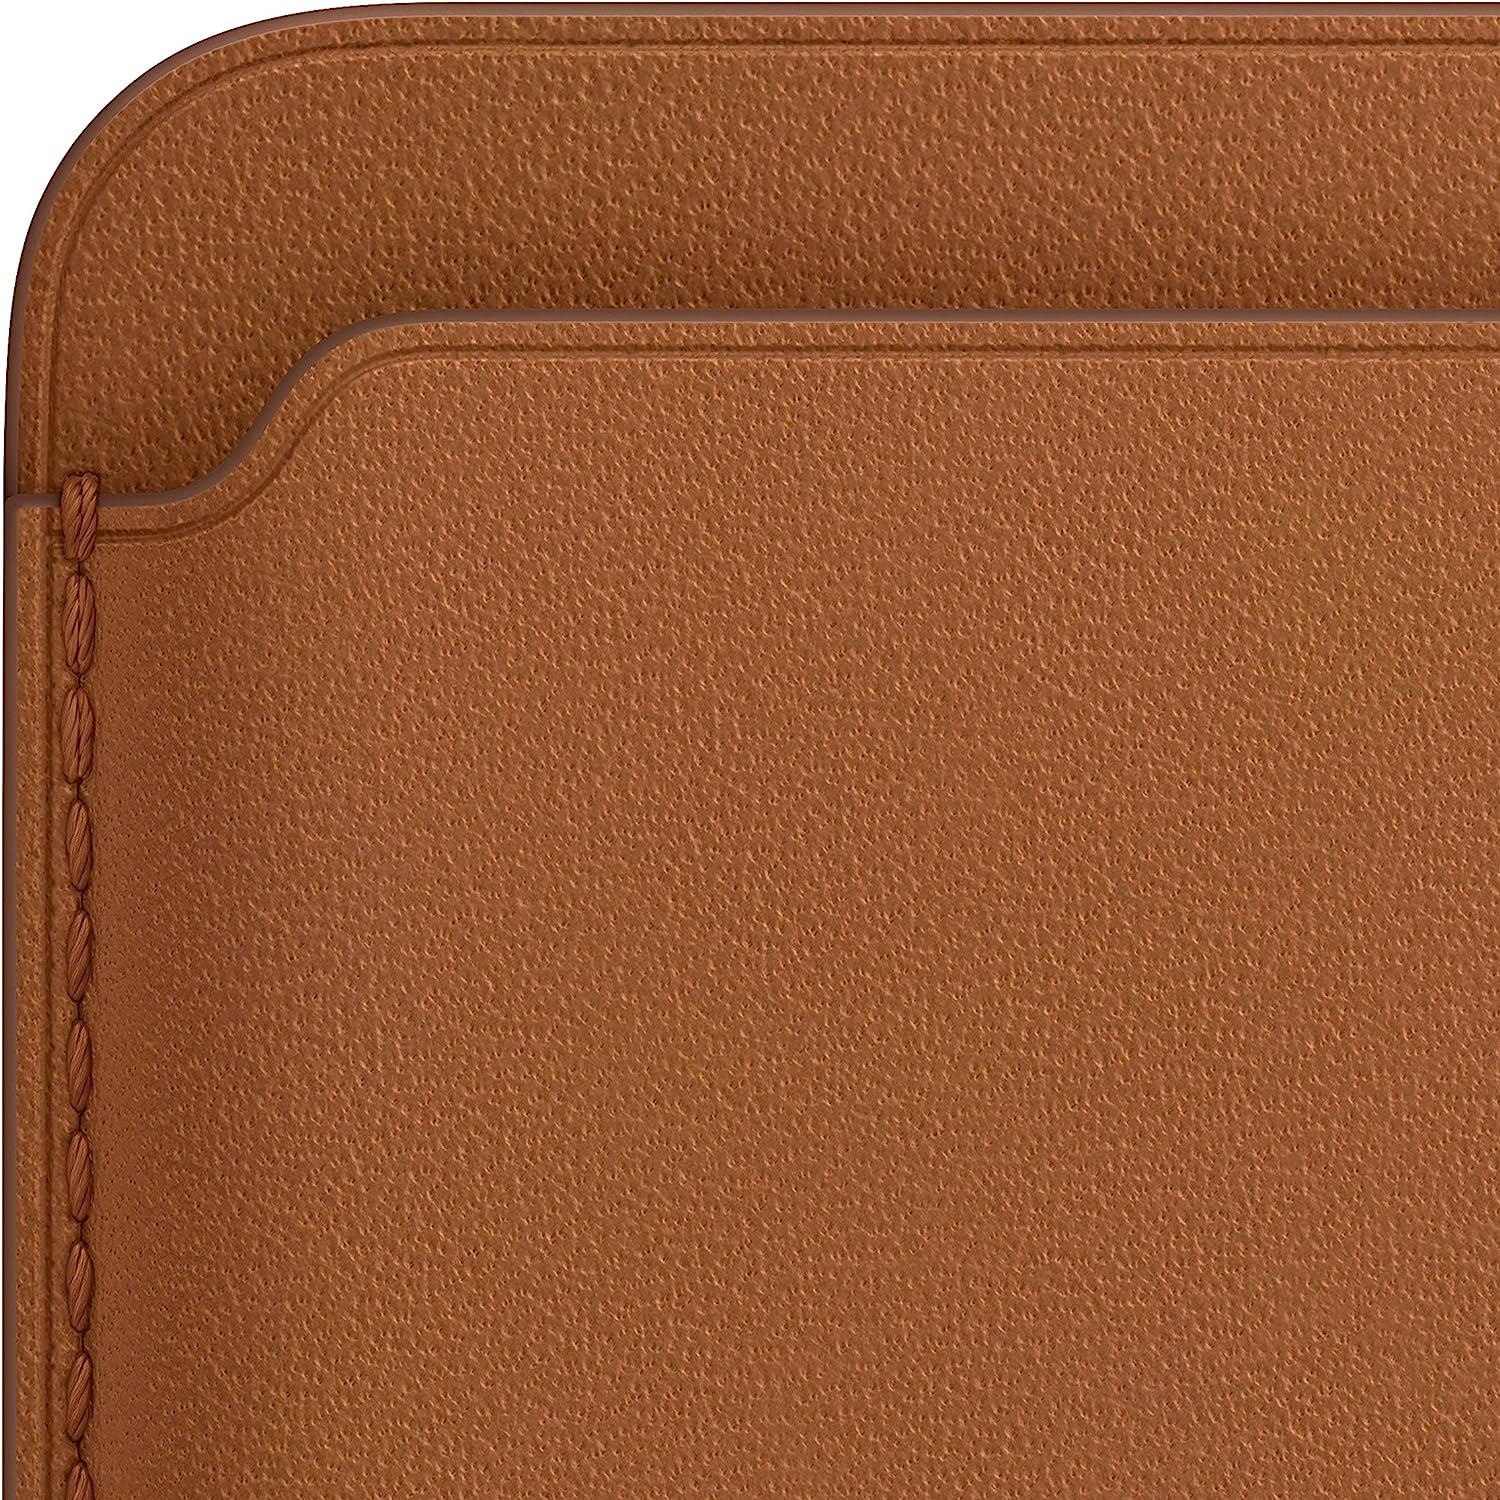 Apple iPhone Leather Wallet with MagSafe (2021) - Saddle Brown (Certified Refurbished)